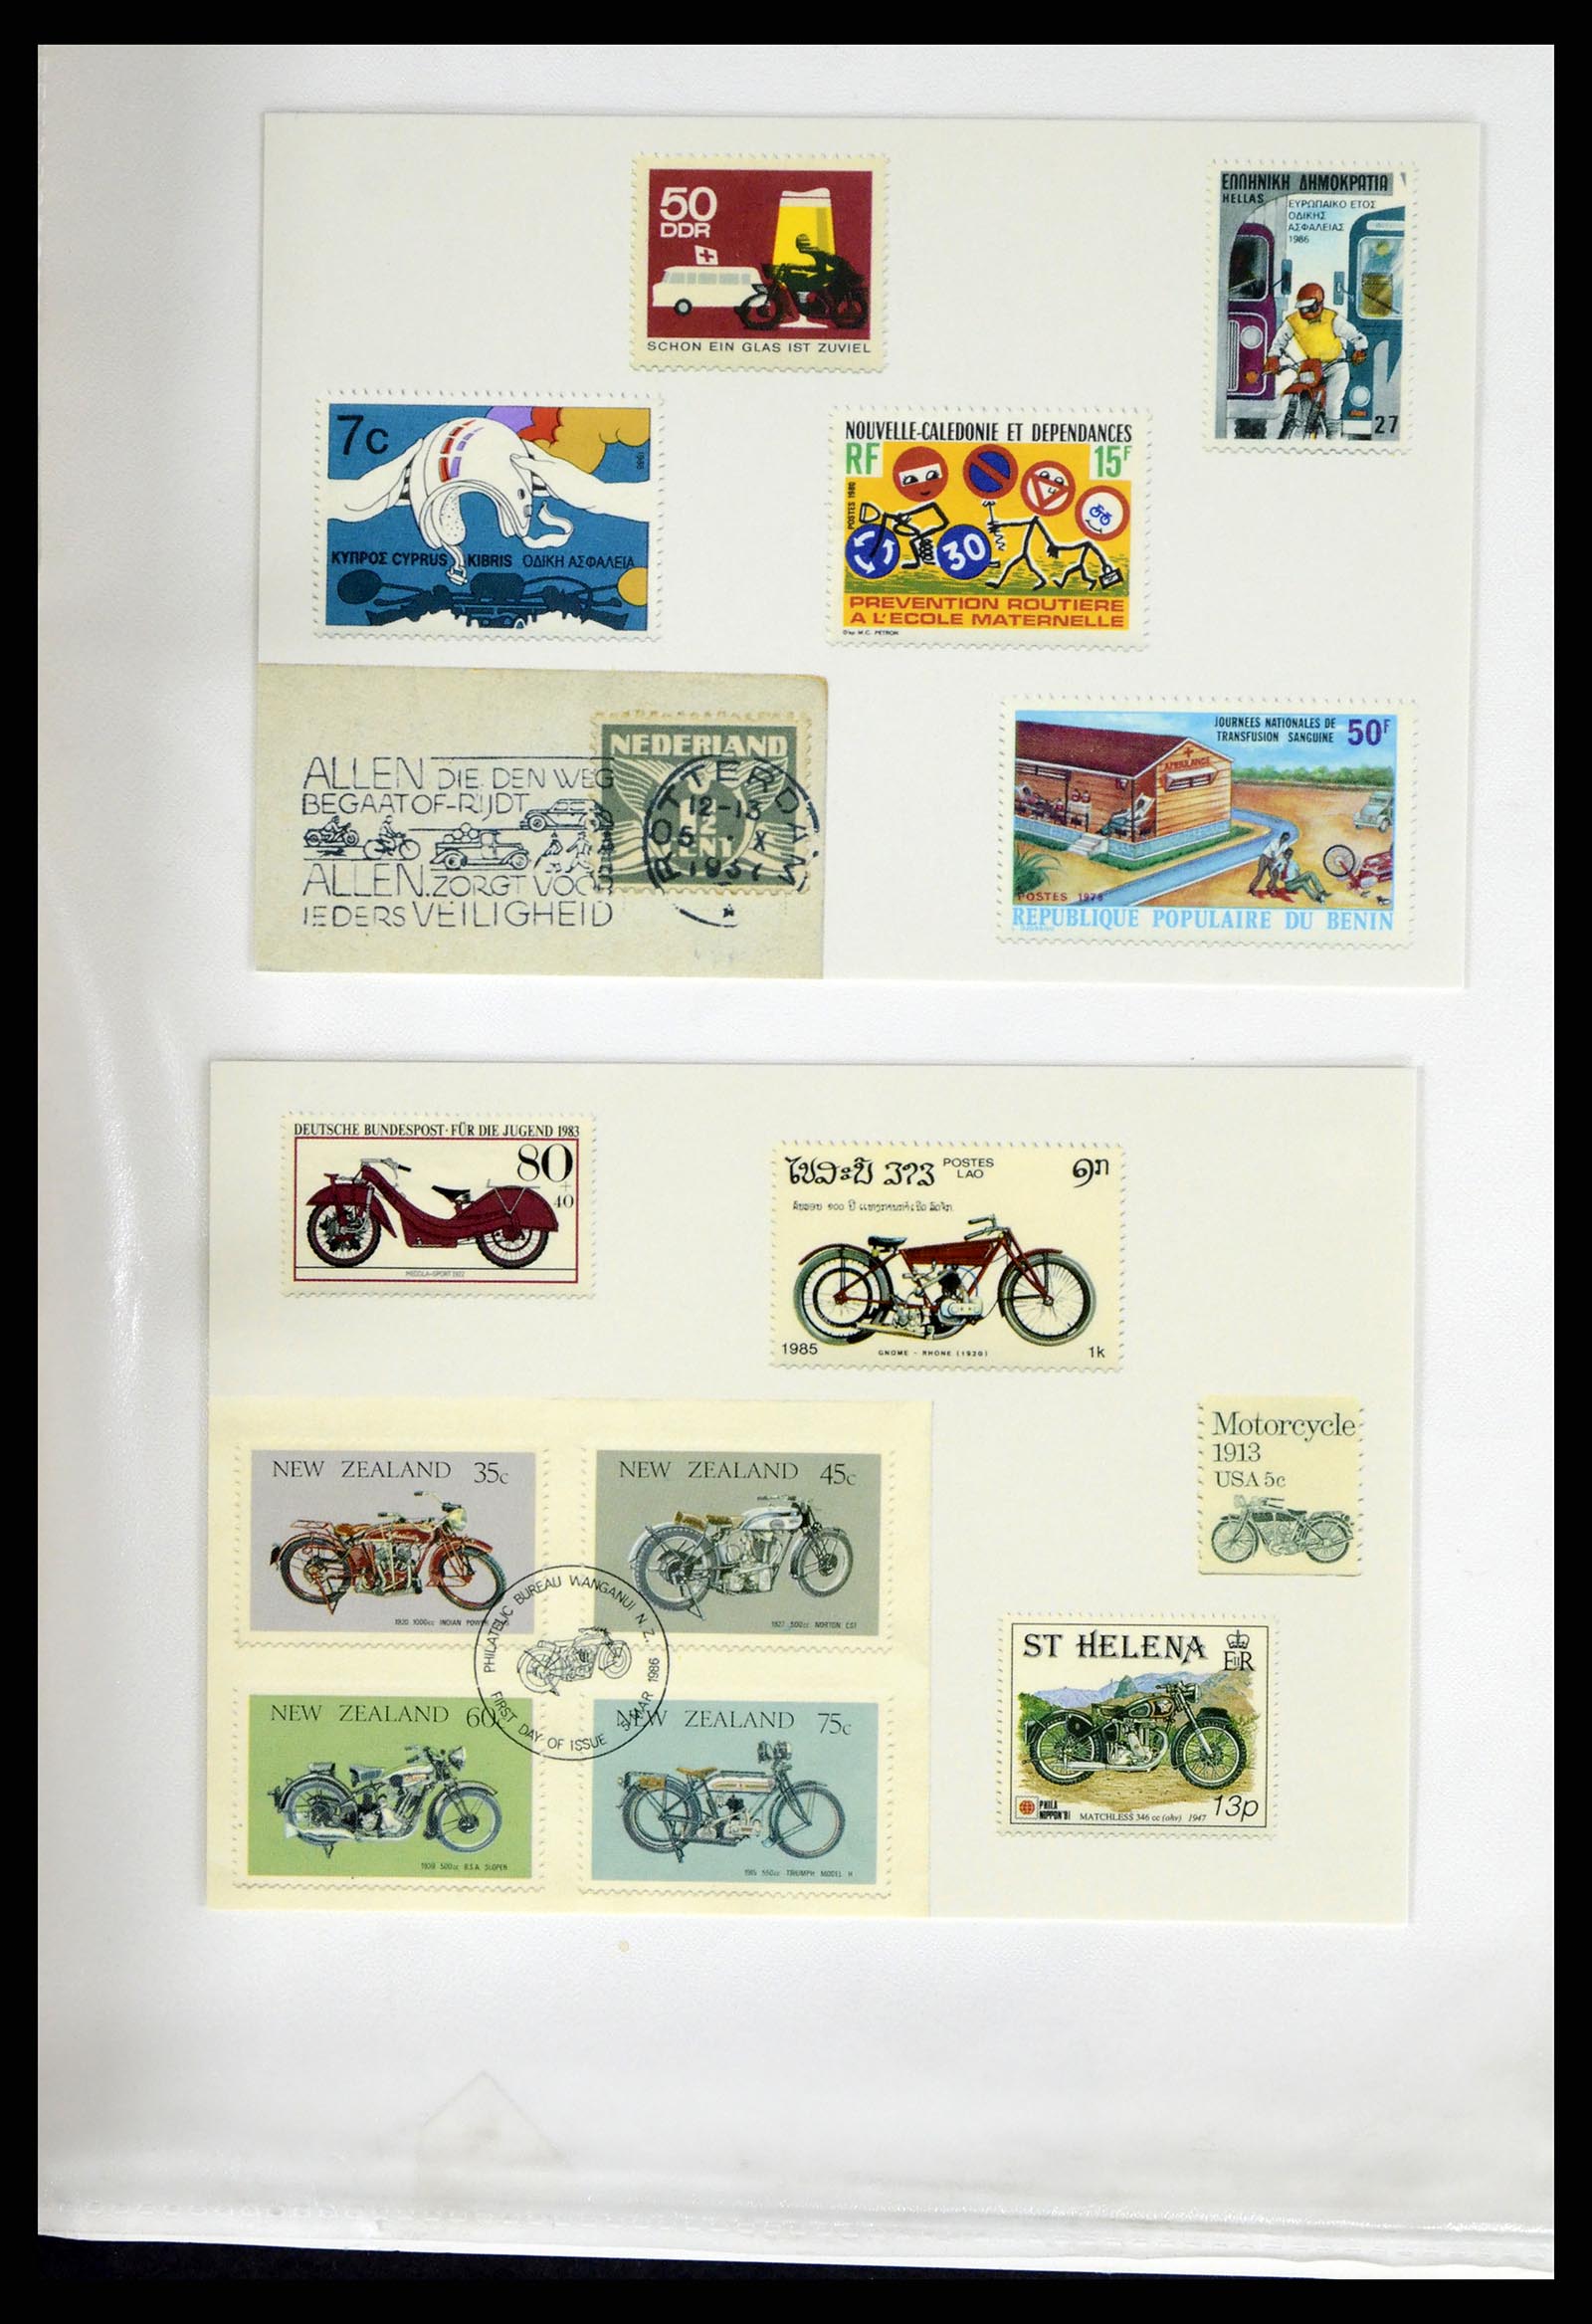 37462 327 - Stamp collection 37462 Thematics Motorcycles 1922-2000.